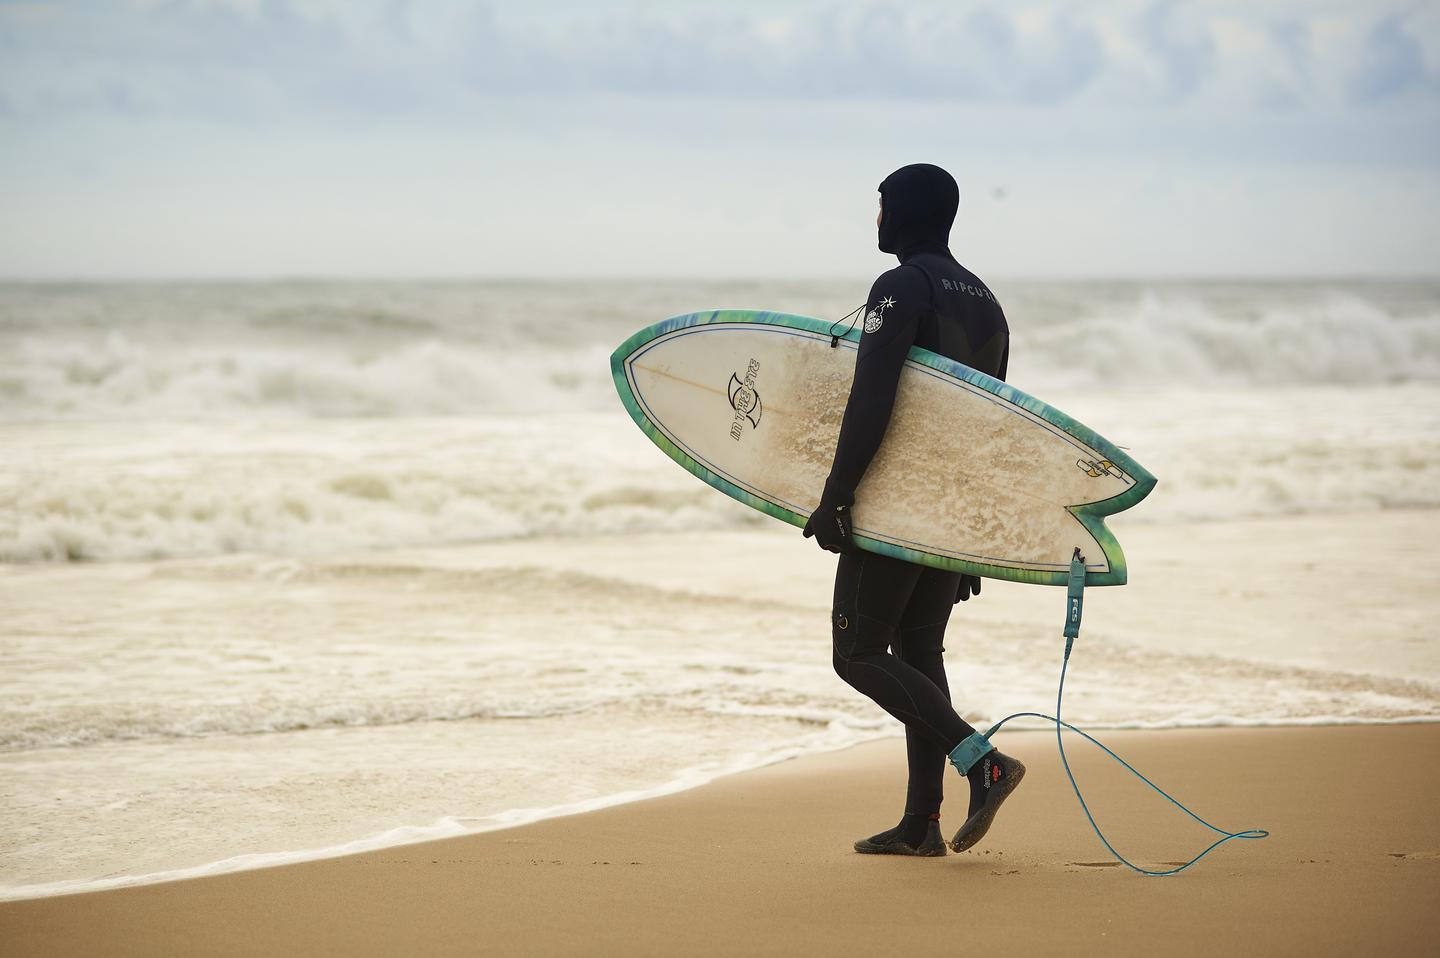 Surfing on the beaches of Cape Hatteras National Seashore